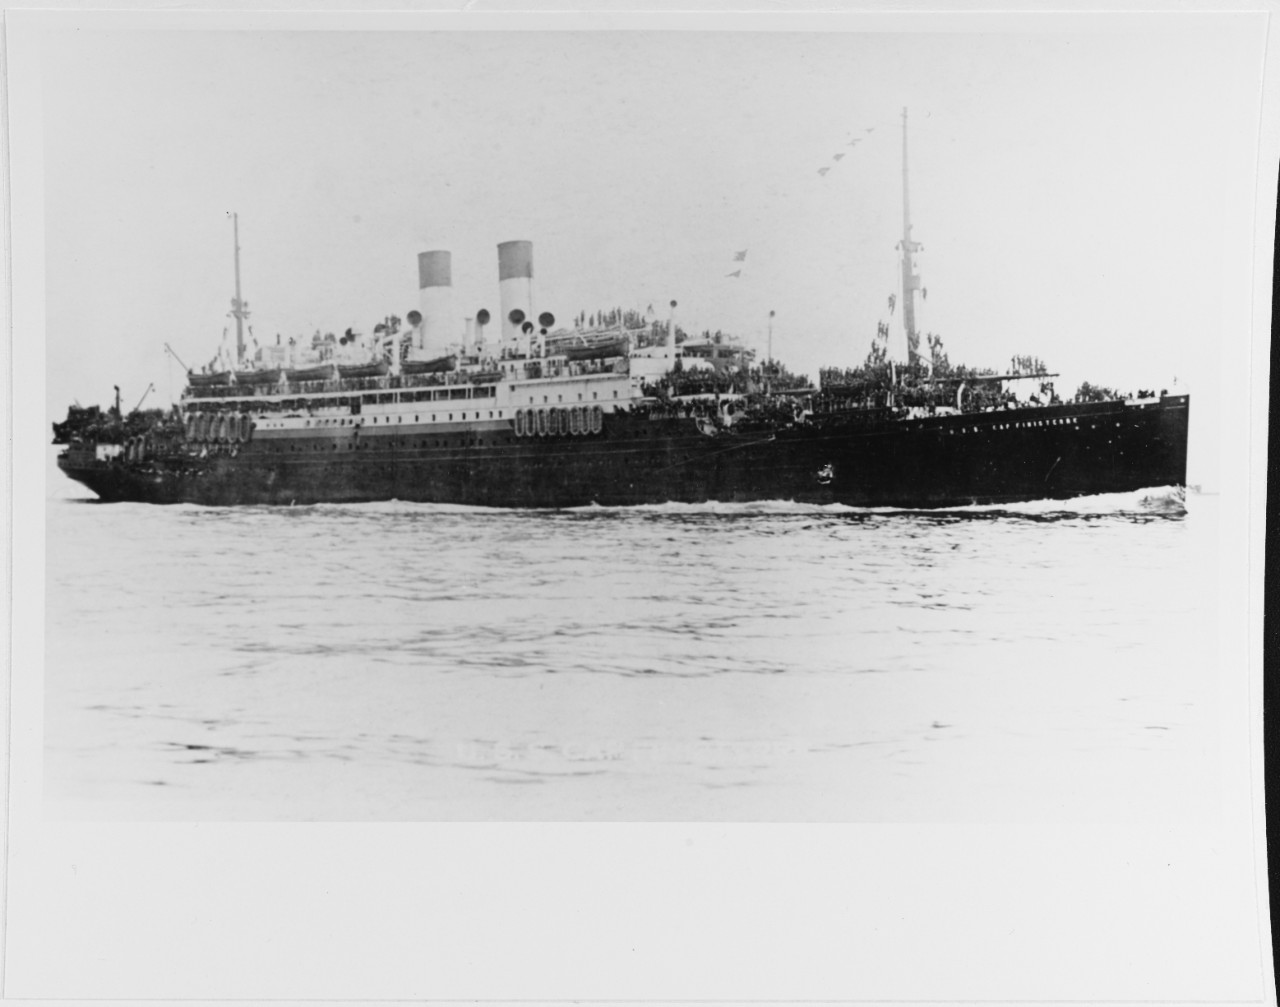 Photo #: NH 84664  USS Cap Finisterre (ID # 4051)